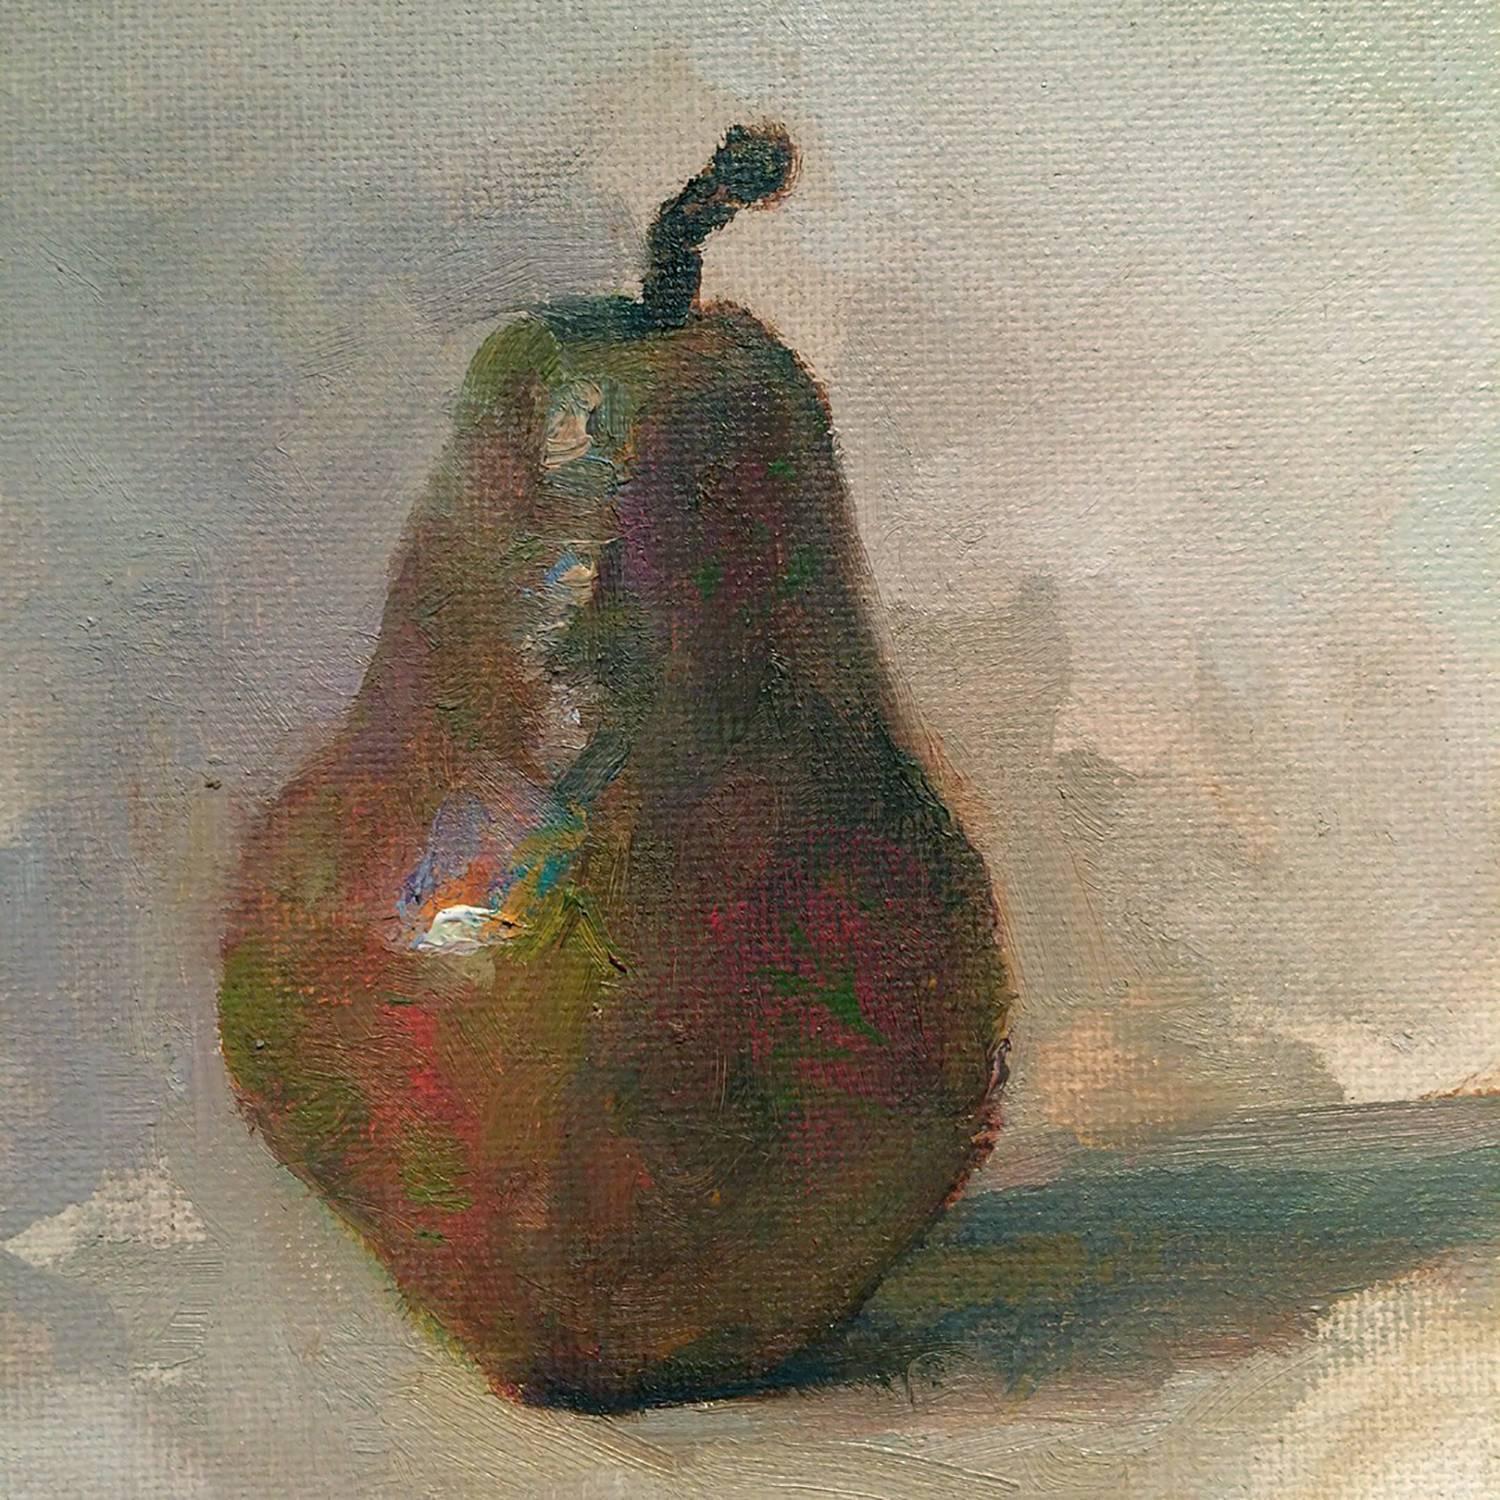 "Group of Pears" is a series of three small works by painter Marc Chatov, featuring hues of maroon, bright green, orange and a range of grey. Each painting is 8 by 10 inches.

Marc Chatov was born in Key Largos, Florida in 1953 to a family